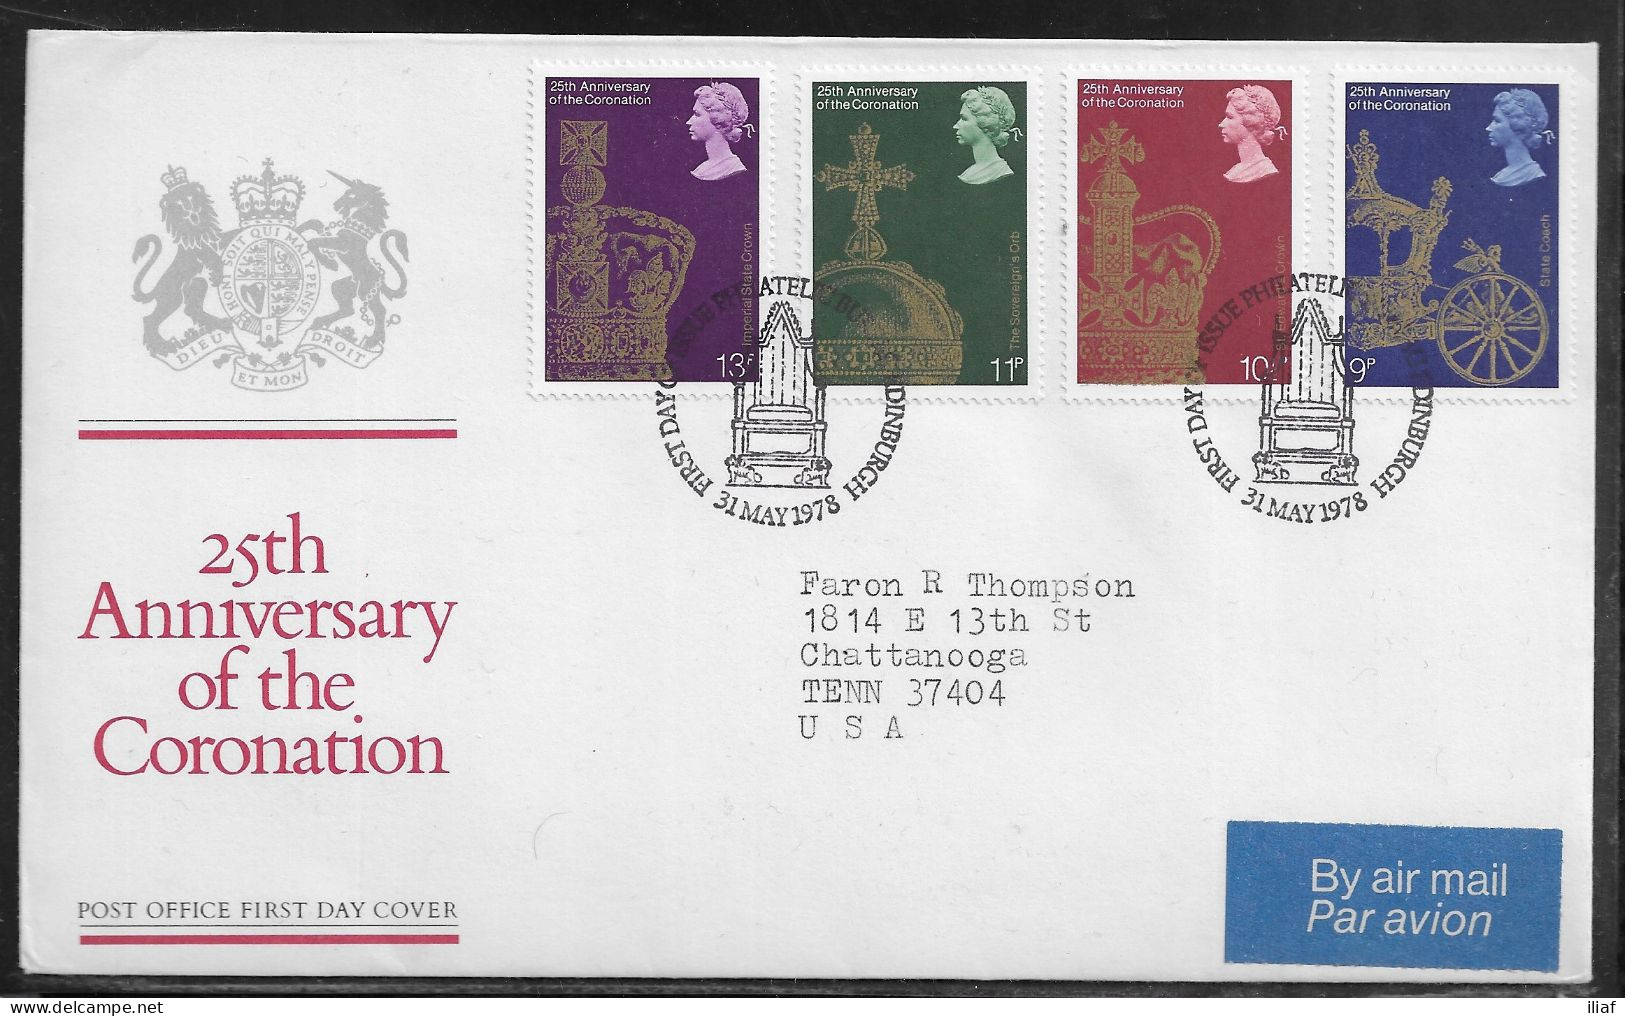 United Kingdom Of Great Britain.  FDC Sc. 835-838.  25th Anniversary Of Coronation.  FDC Cancellation On FDC Envelope - 1971-1980 Decimal Issues